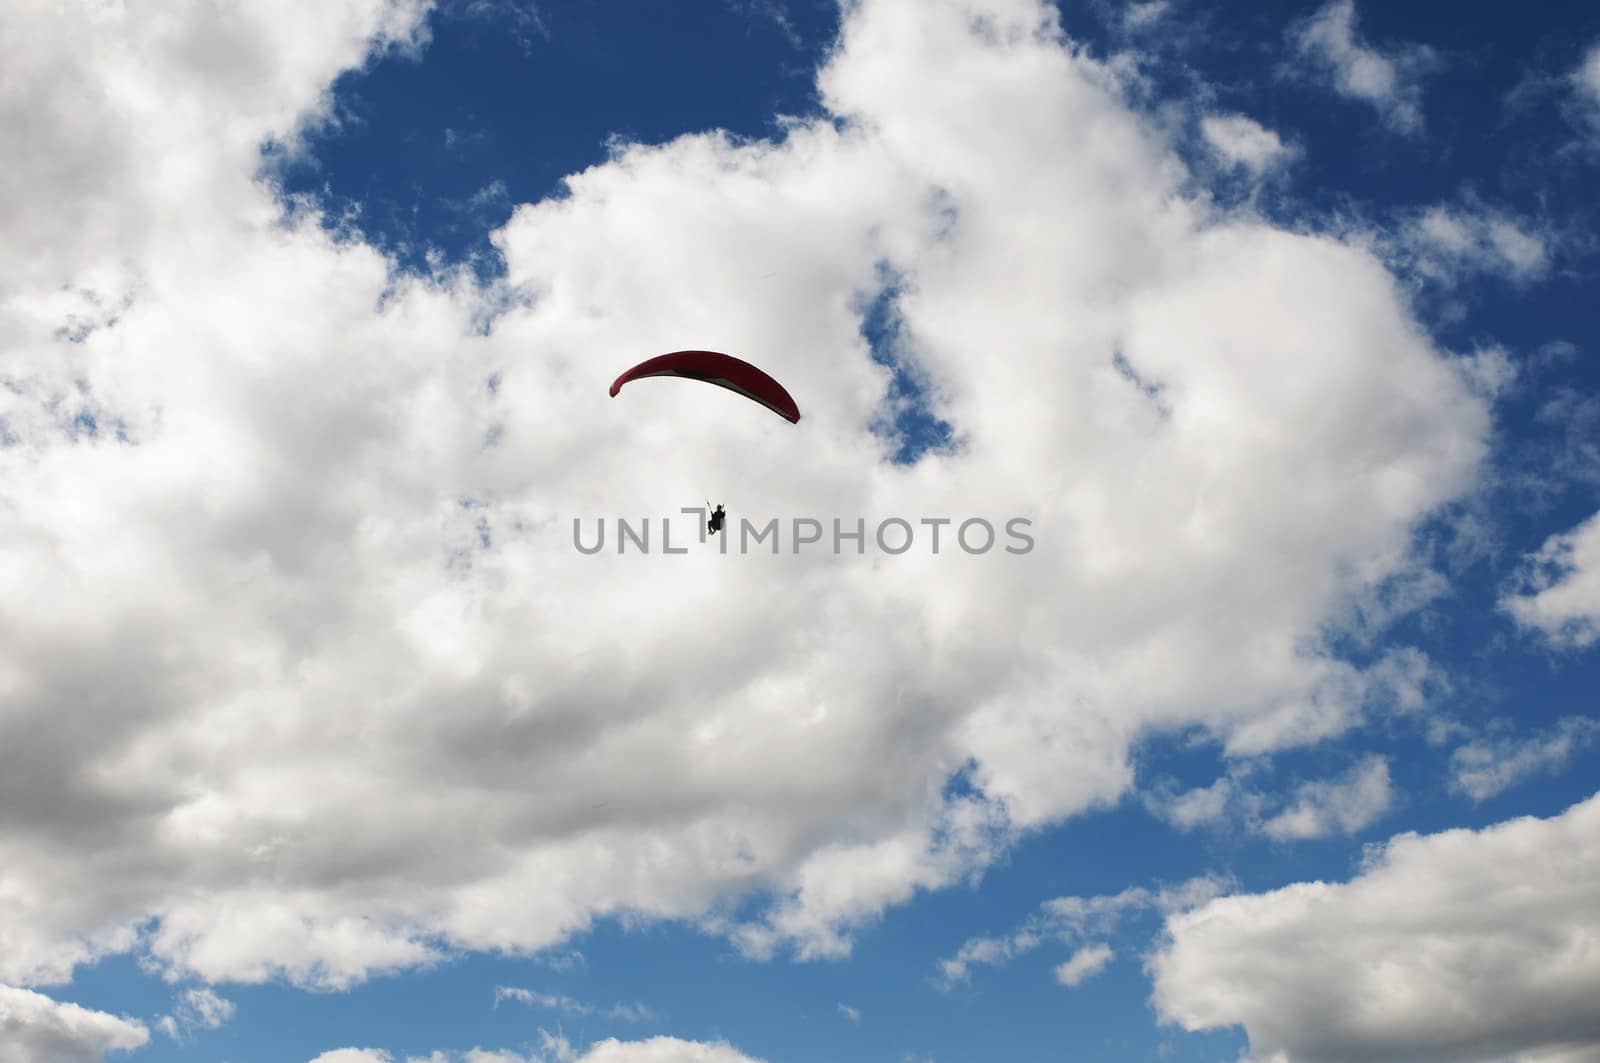 Paragliding is the recreational and competitive adventure sport of flying paragliders